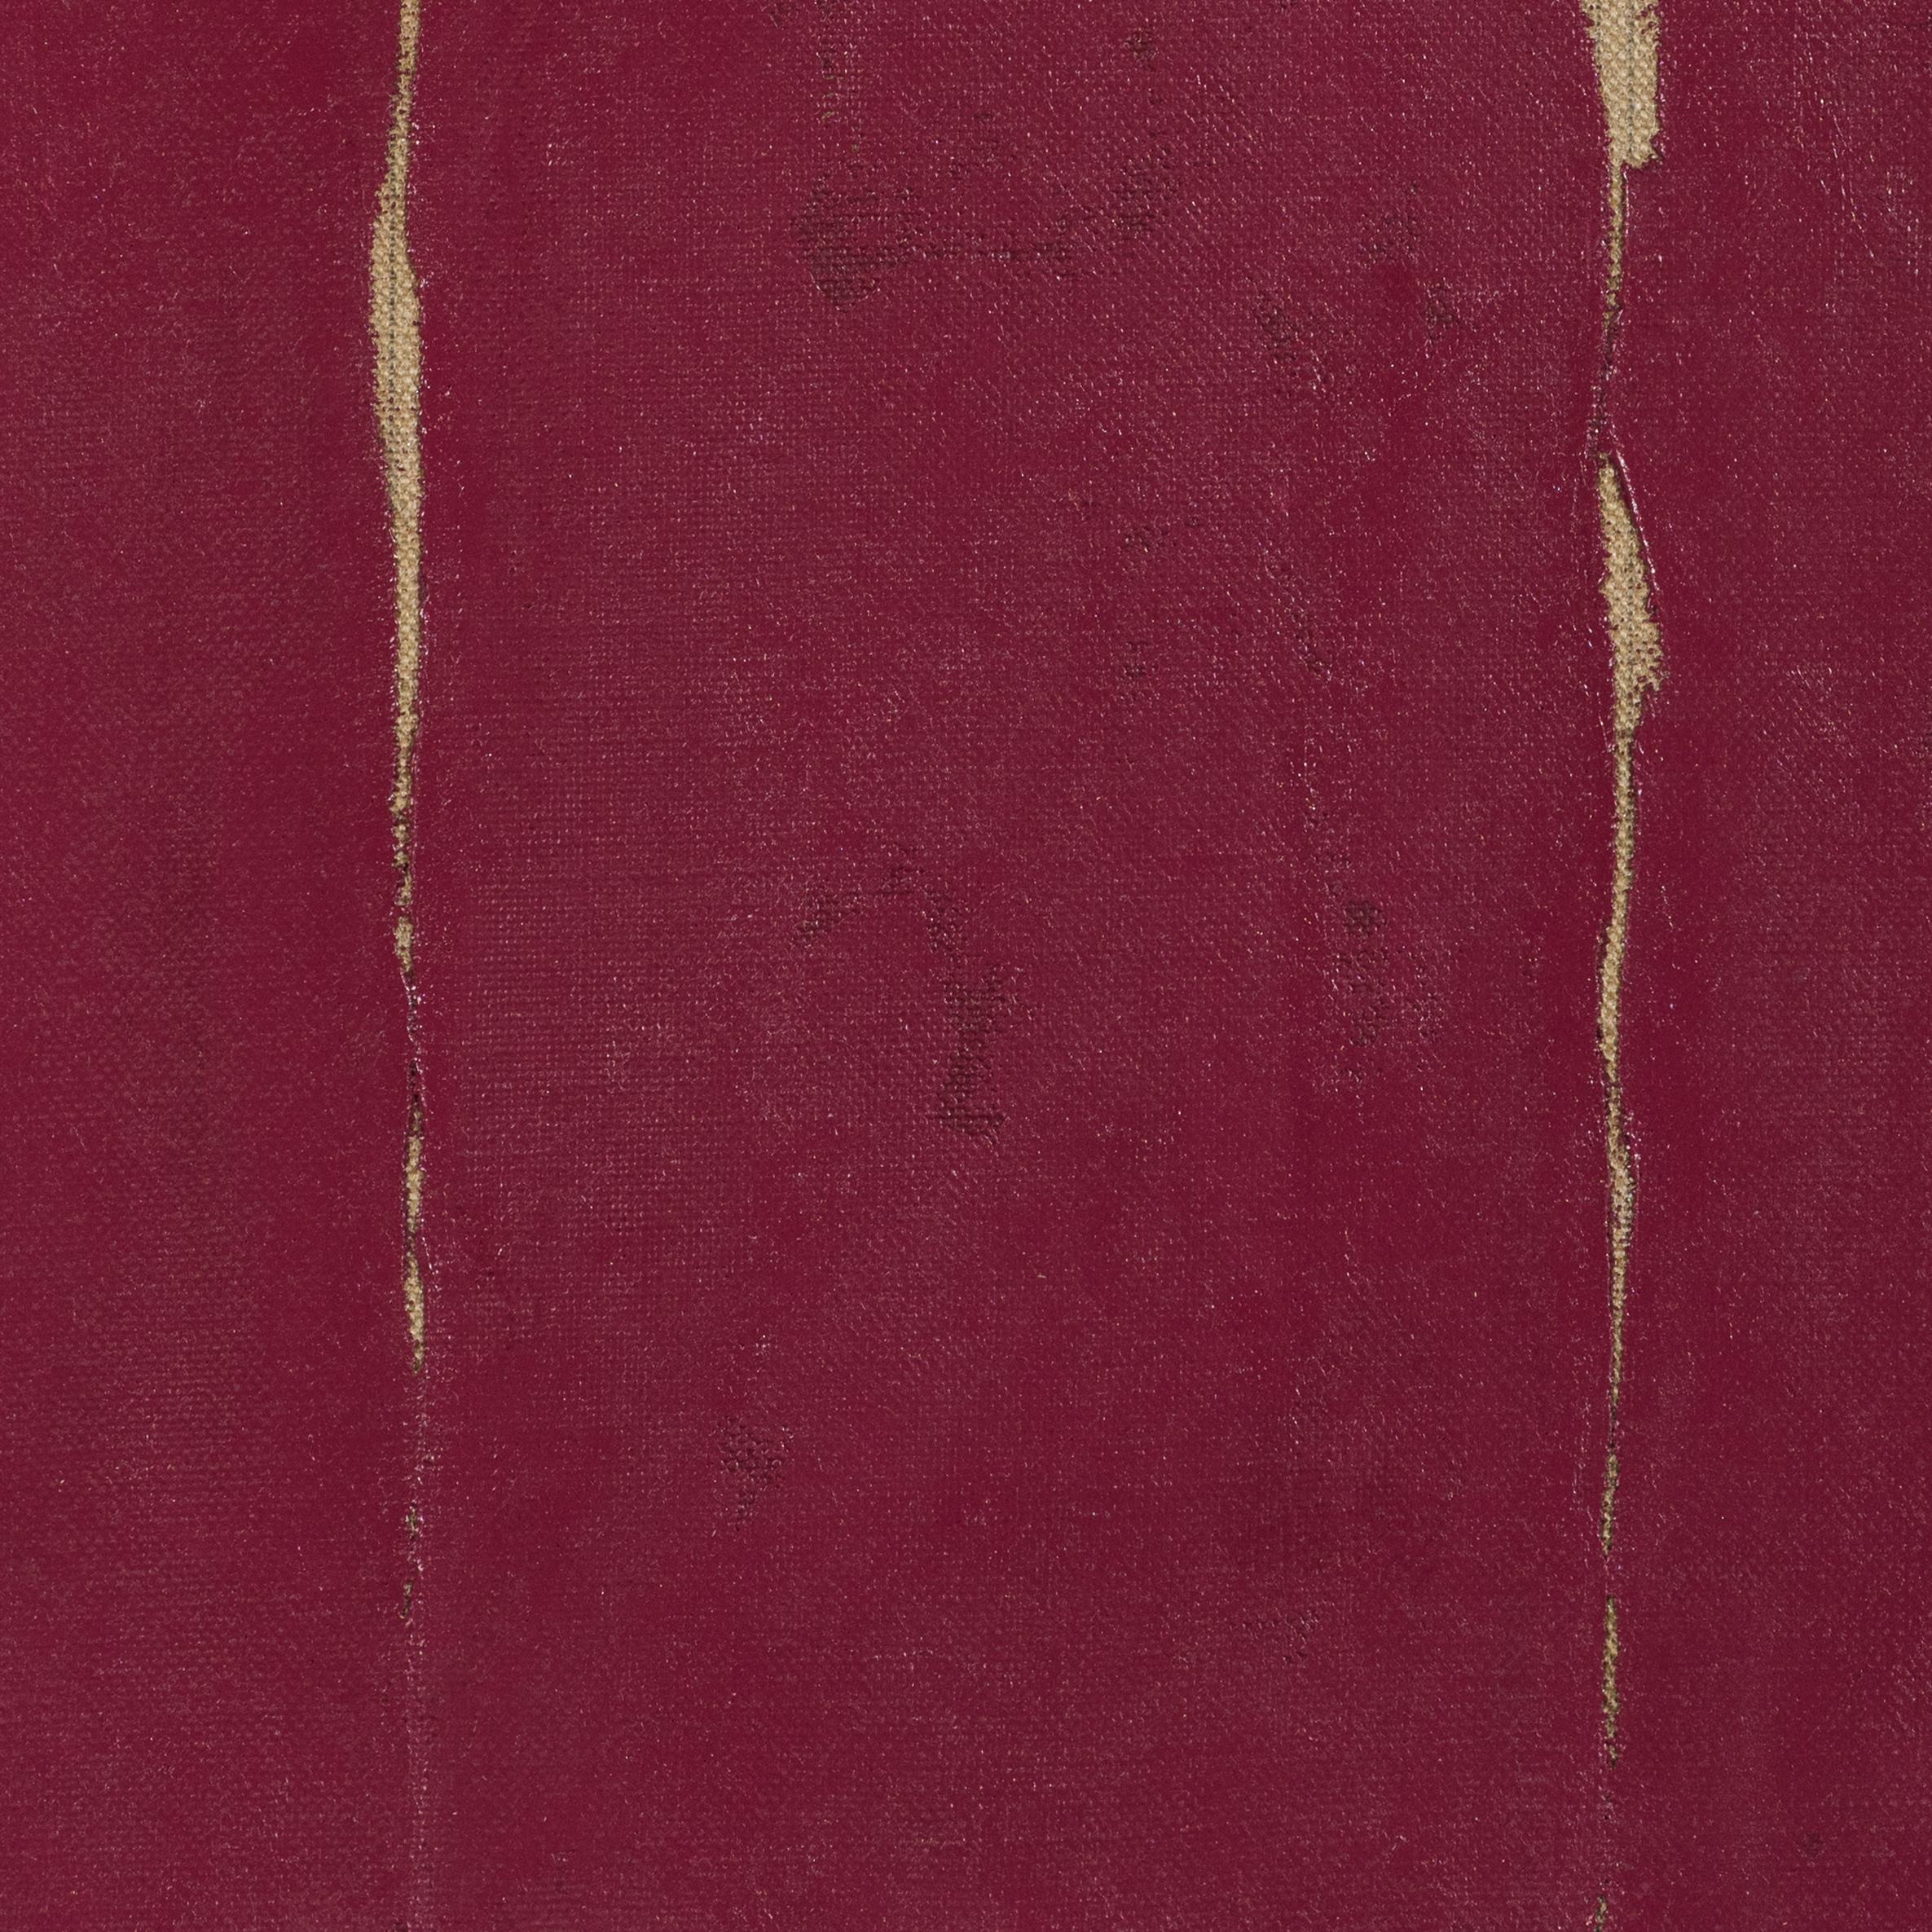 untitled red painting